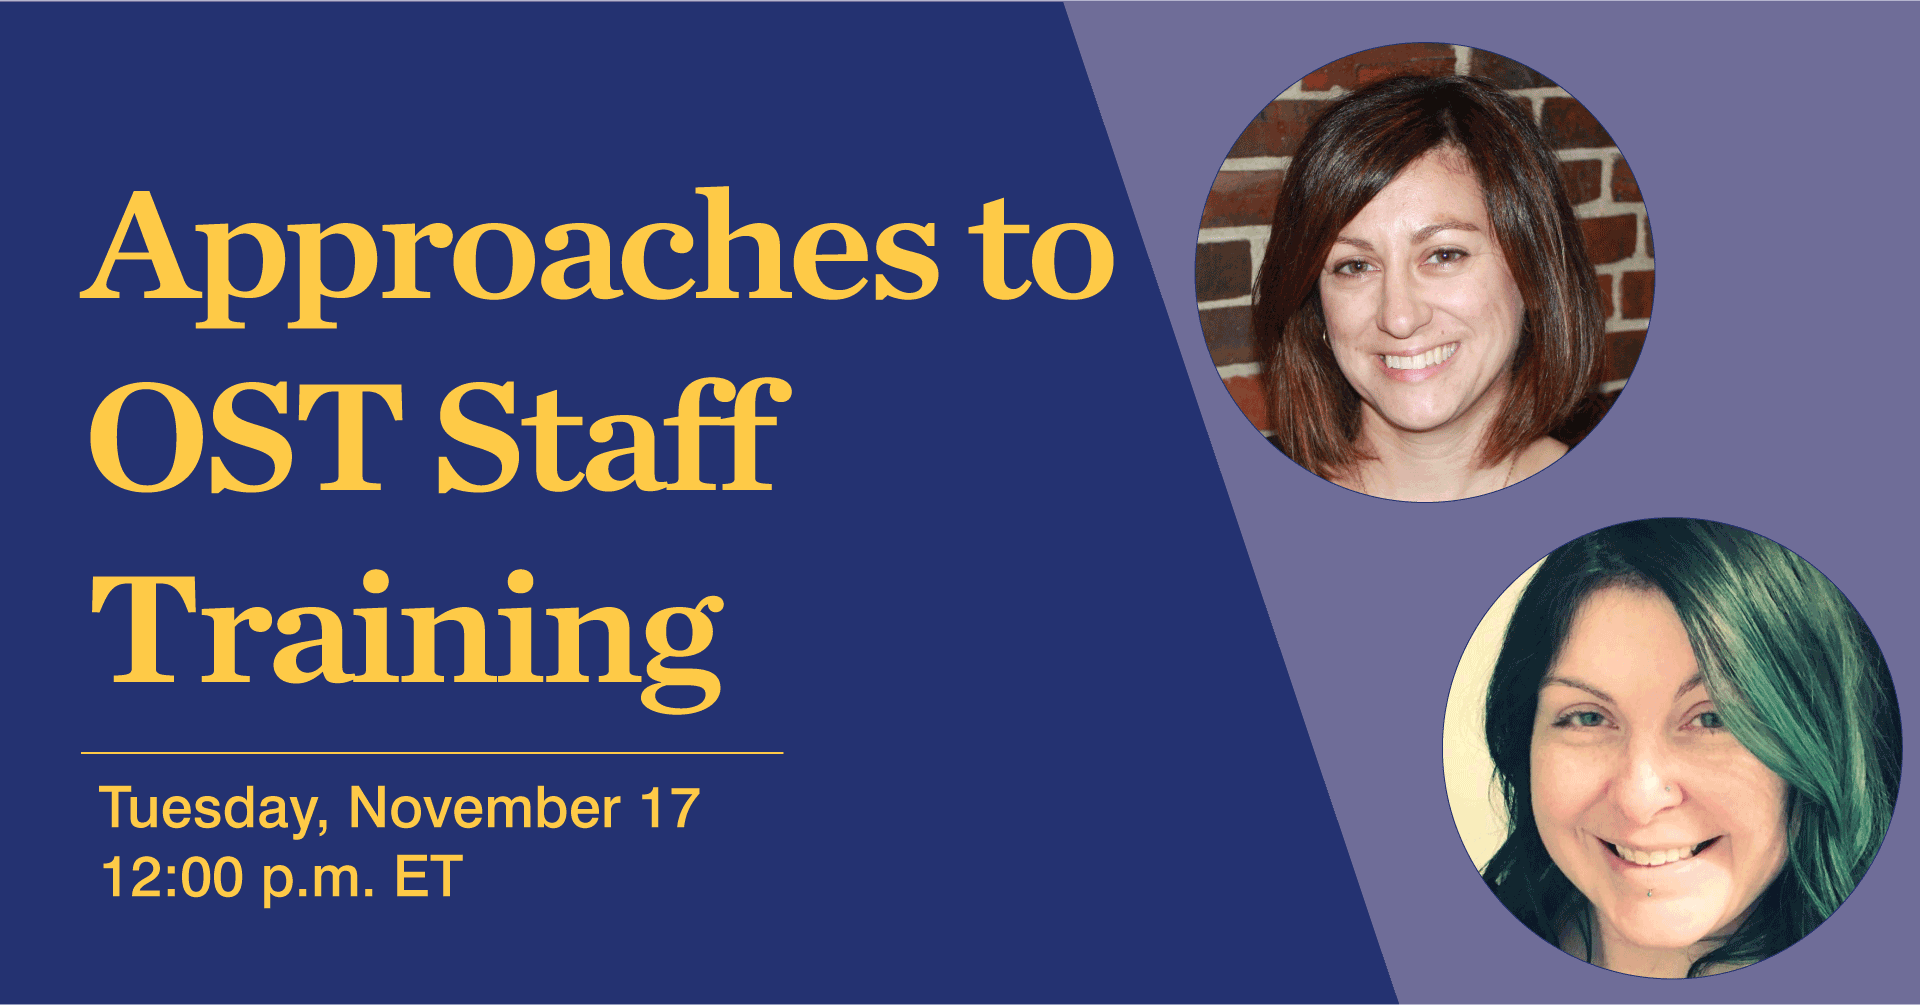 Approaches to OST Staff Training